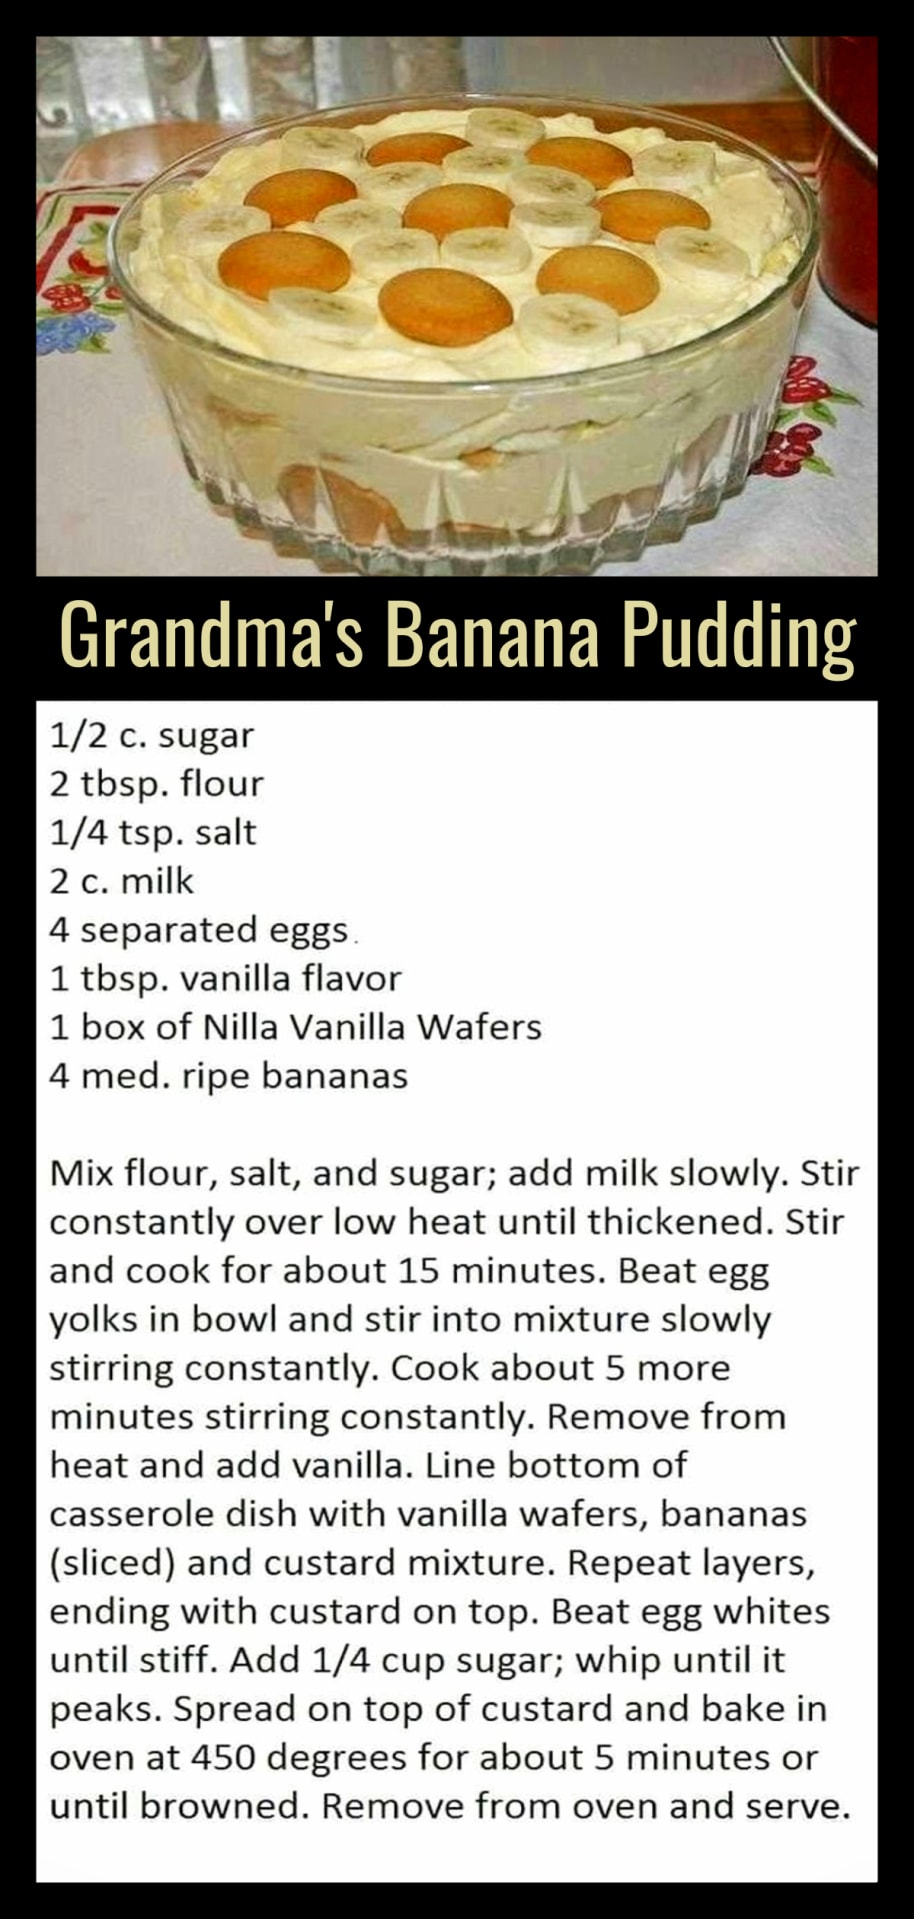 Grandma's Desserts - Dessert recipes that your mom, your grandmother (or your lunch lady) used to make from scratch - Grandma's Old-Fashioned Banana Pudding Recipe from scratch - Homemade Potluck and Family Reunion Dessert Ideas That Will Even Please Your Church Crowd